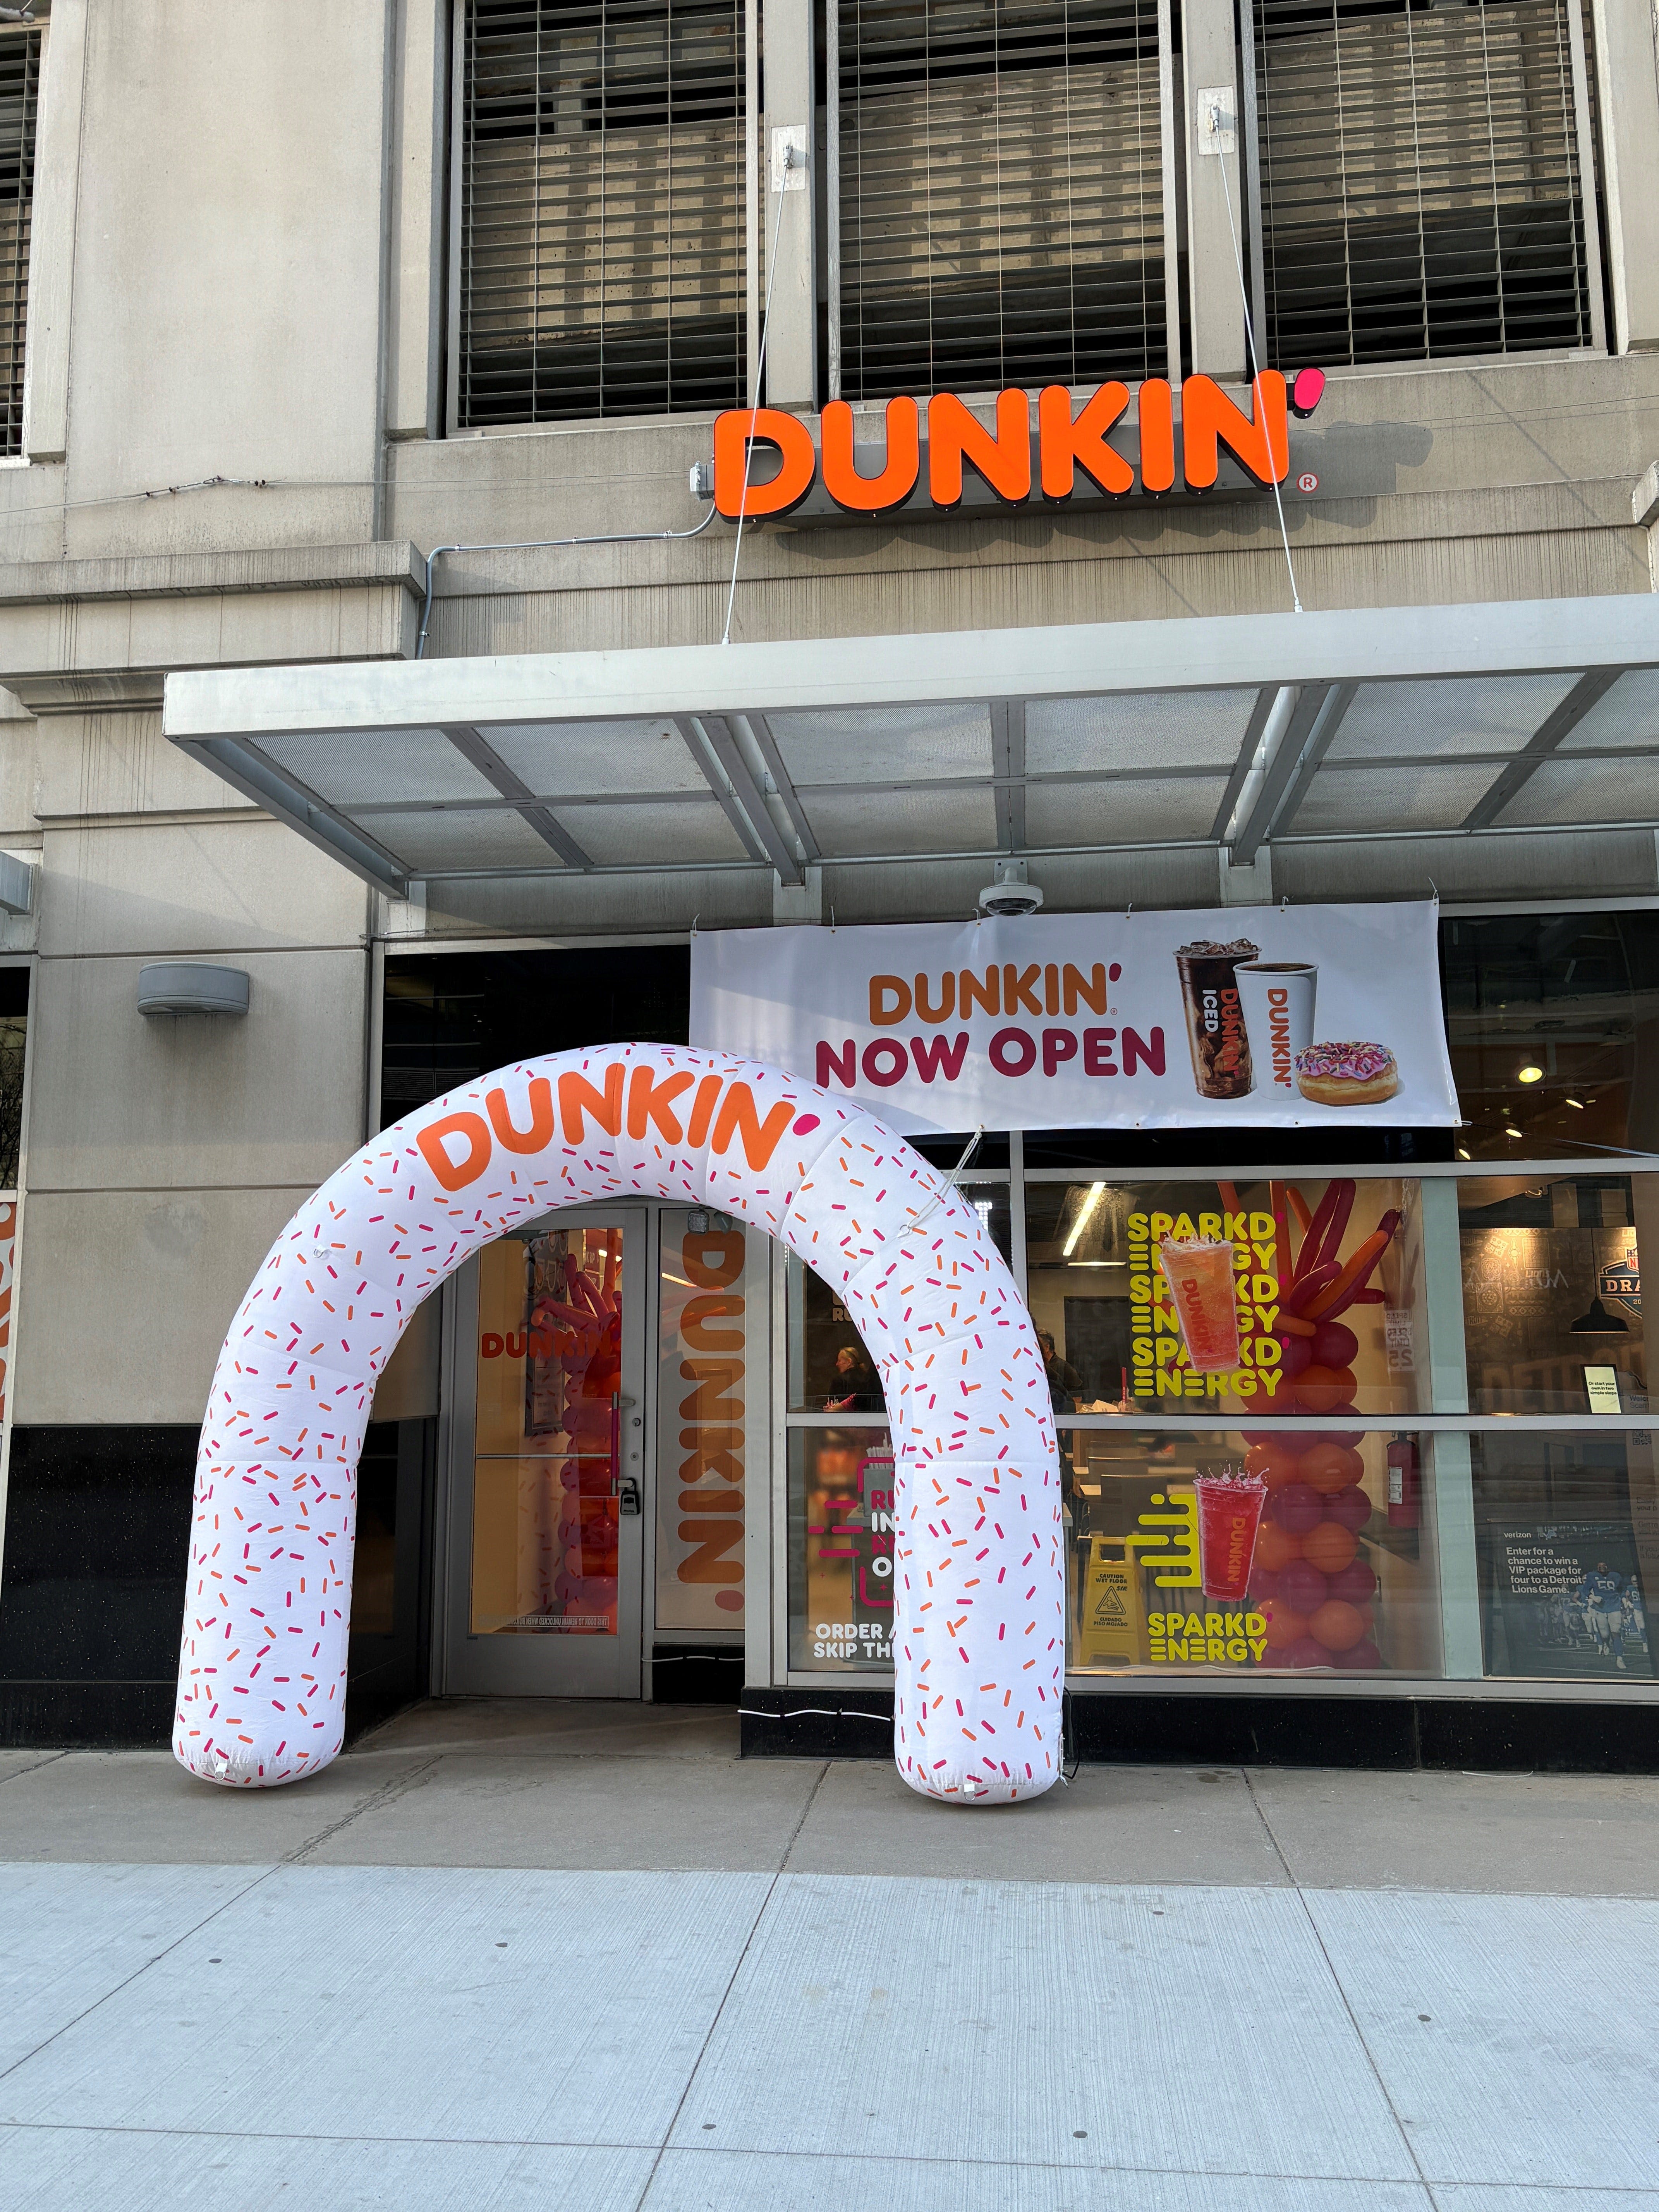 Briggs' mailbag: Downtown Indianapolis needs a Dunkin'